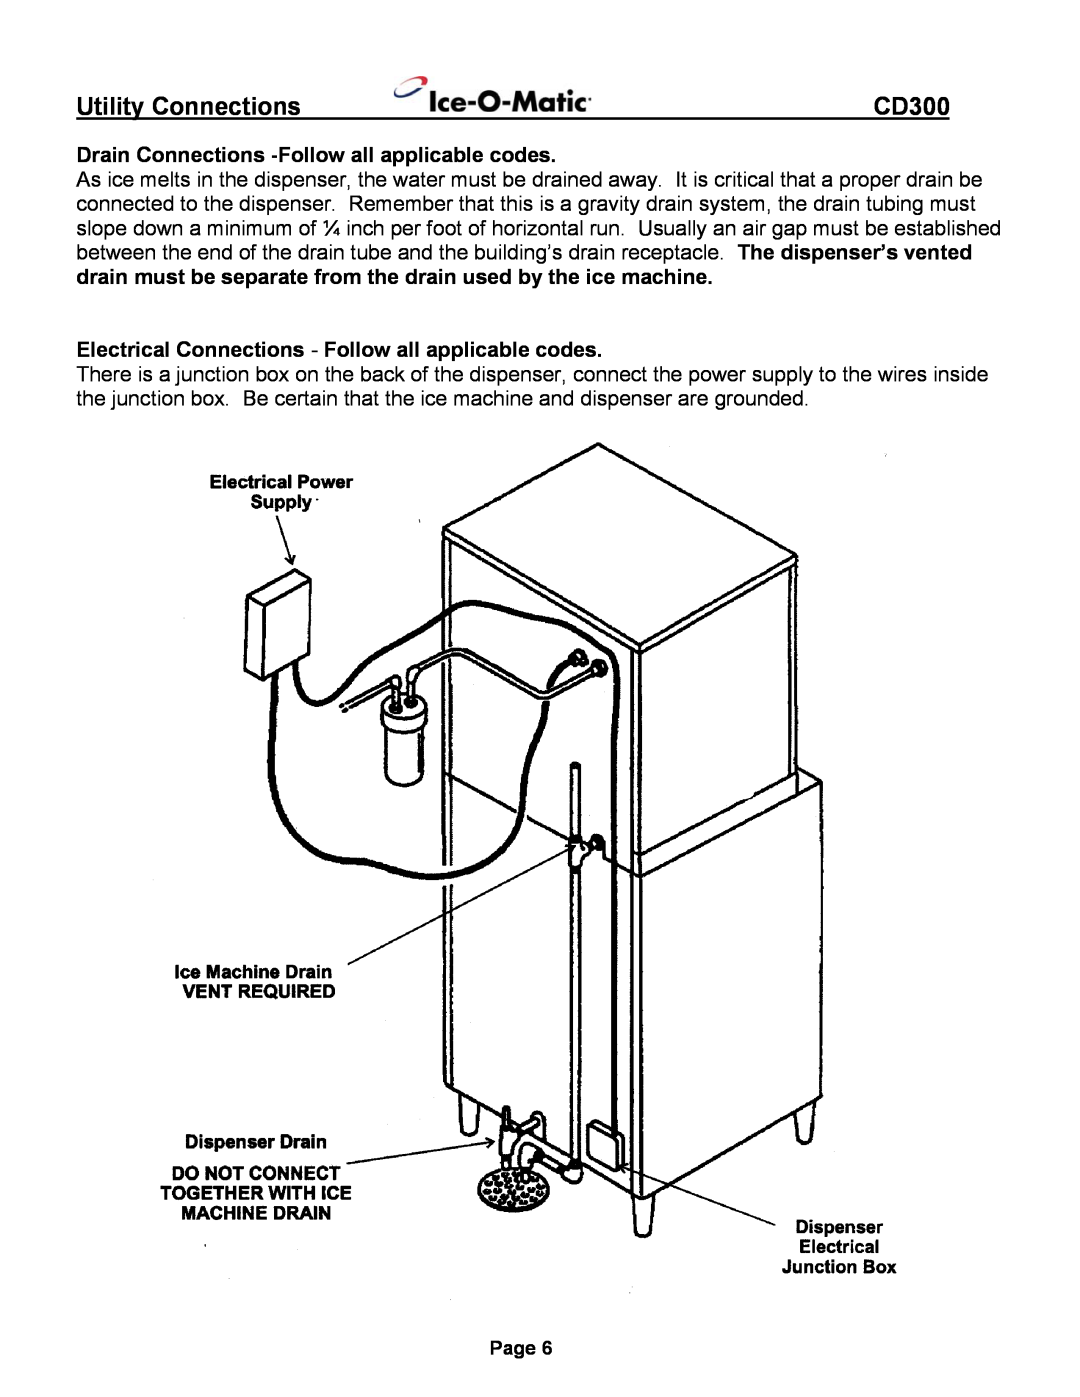 Ice-O-Matic CD300 installation manual Utility Connections, Drain Connections -Followall applicable codes 